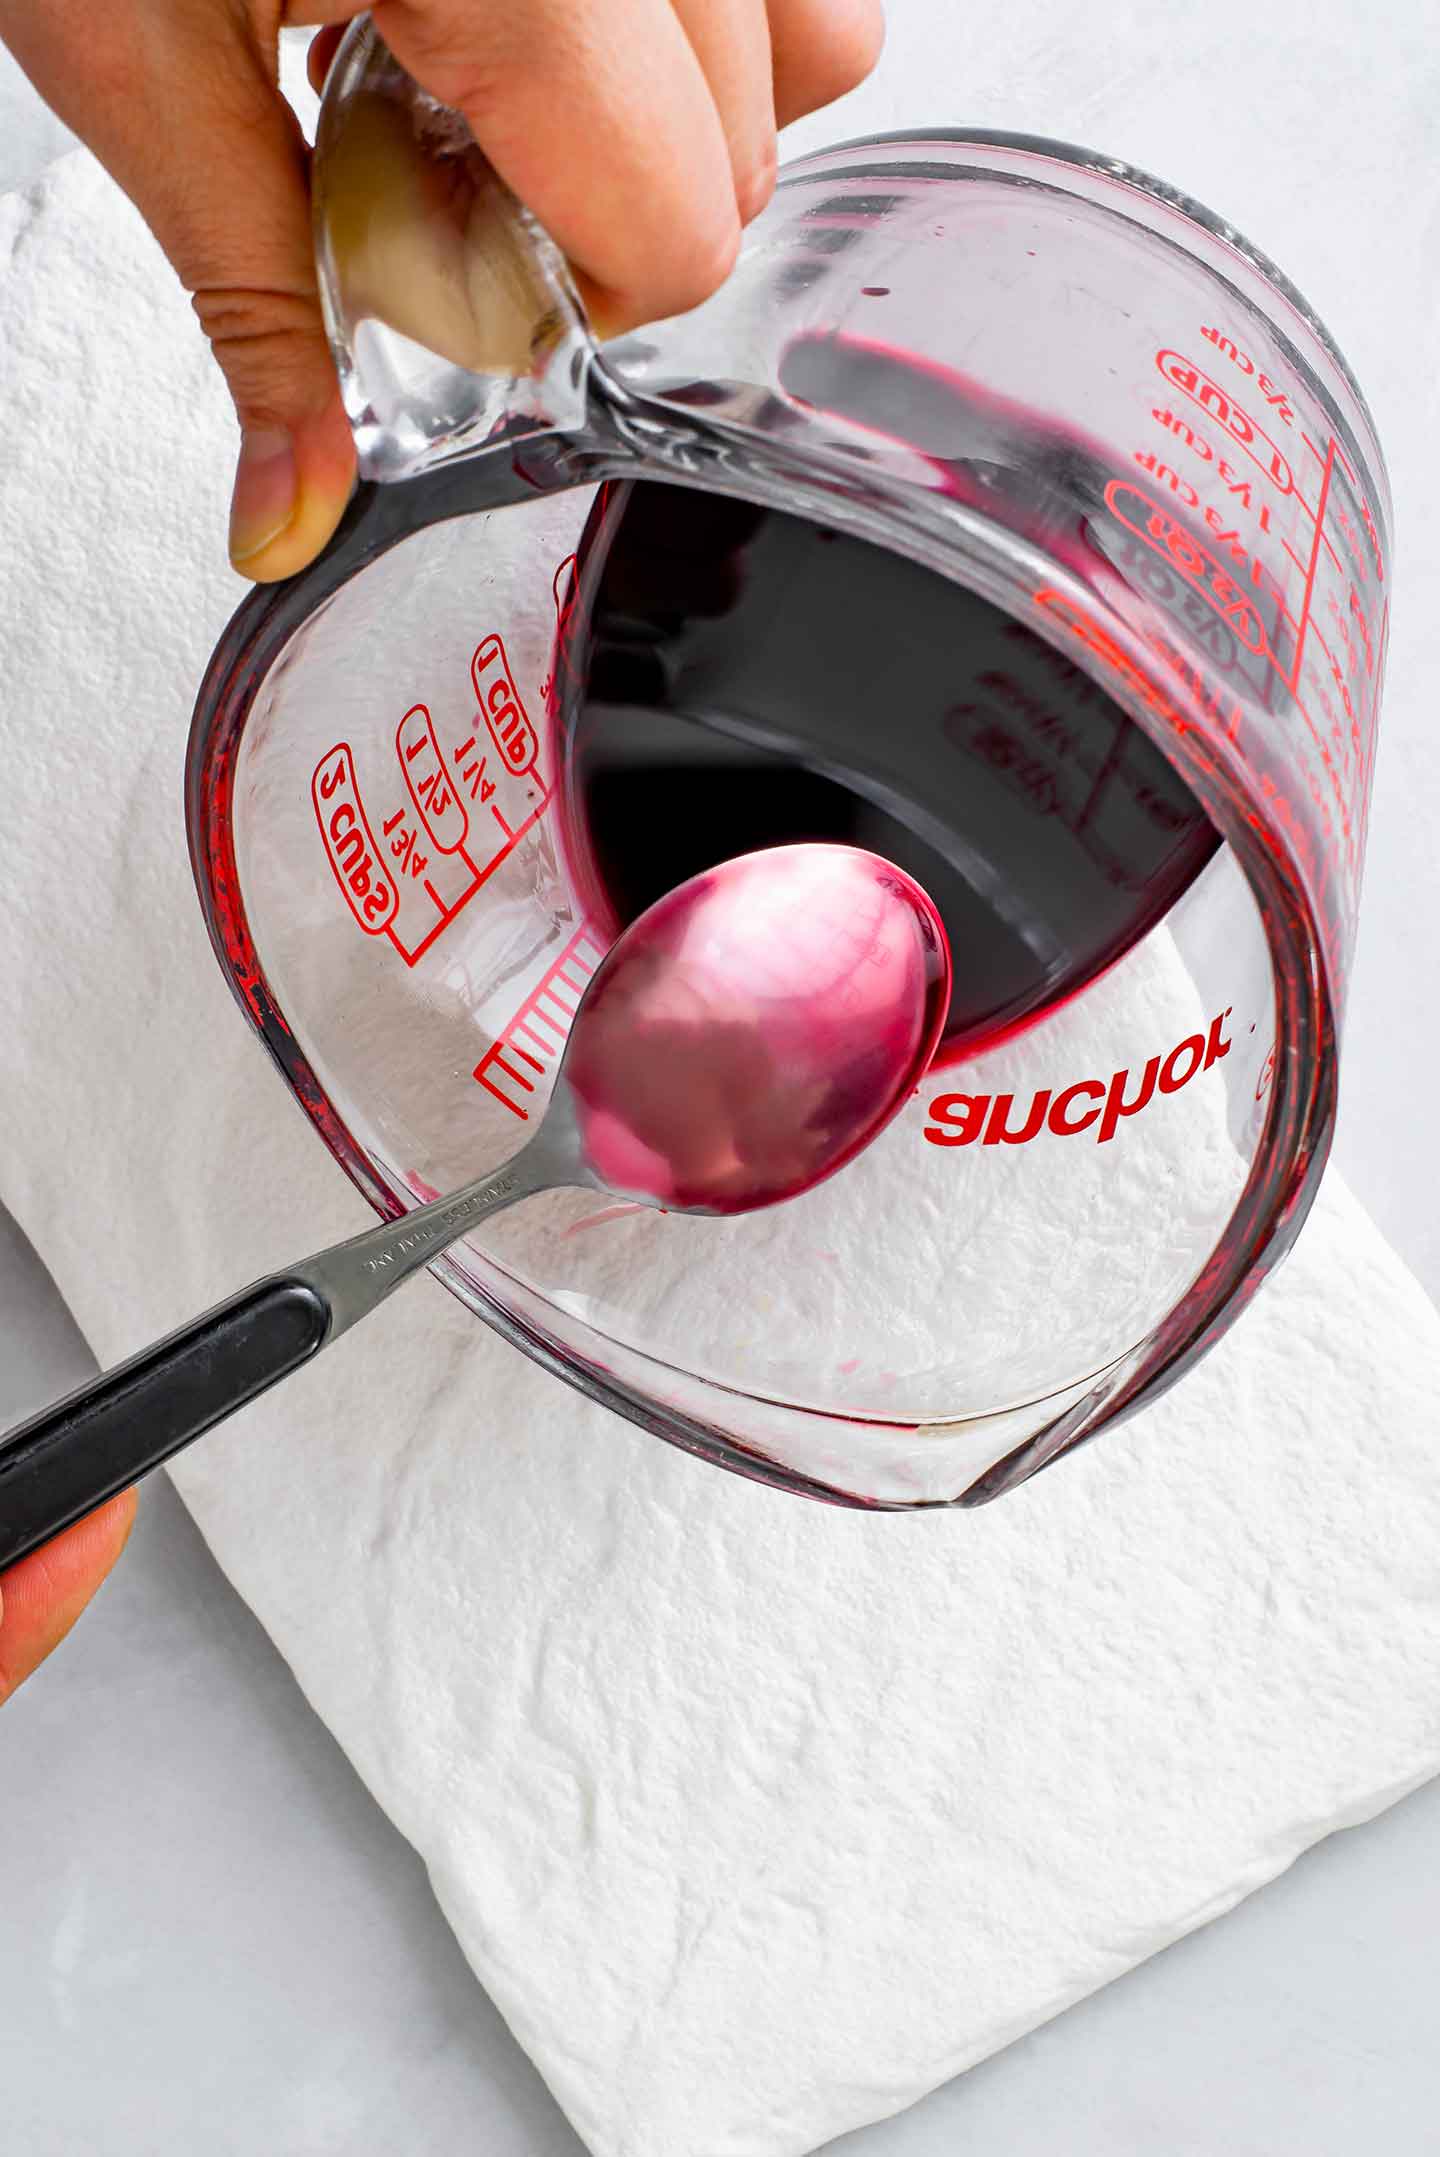 Top down view of pomegranate molasses is a glass measuring cup. The back of a steel spoon is lightly coated in the burgundy molasses.